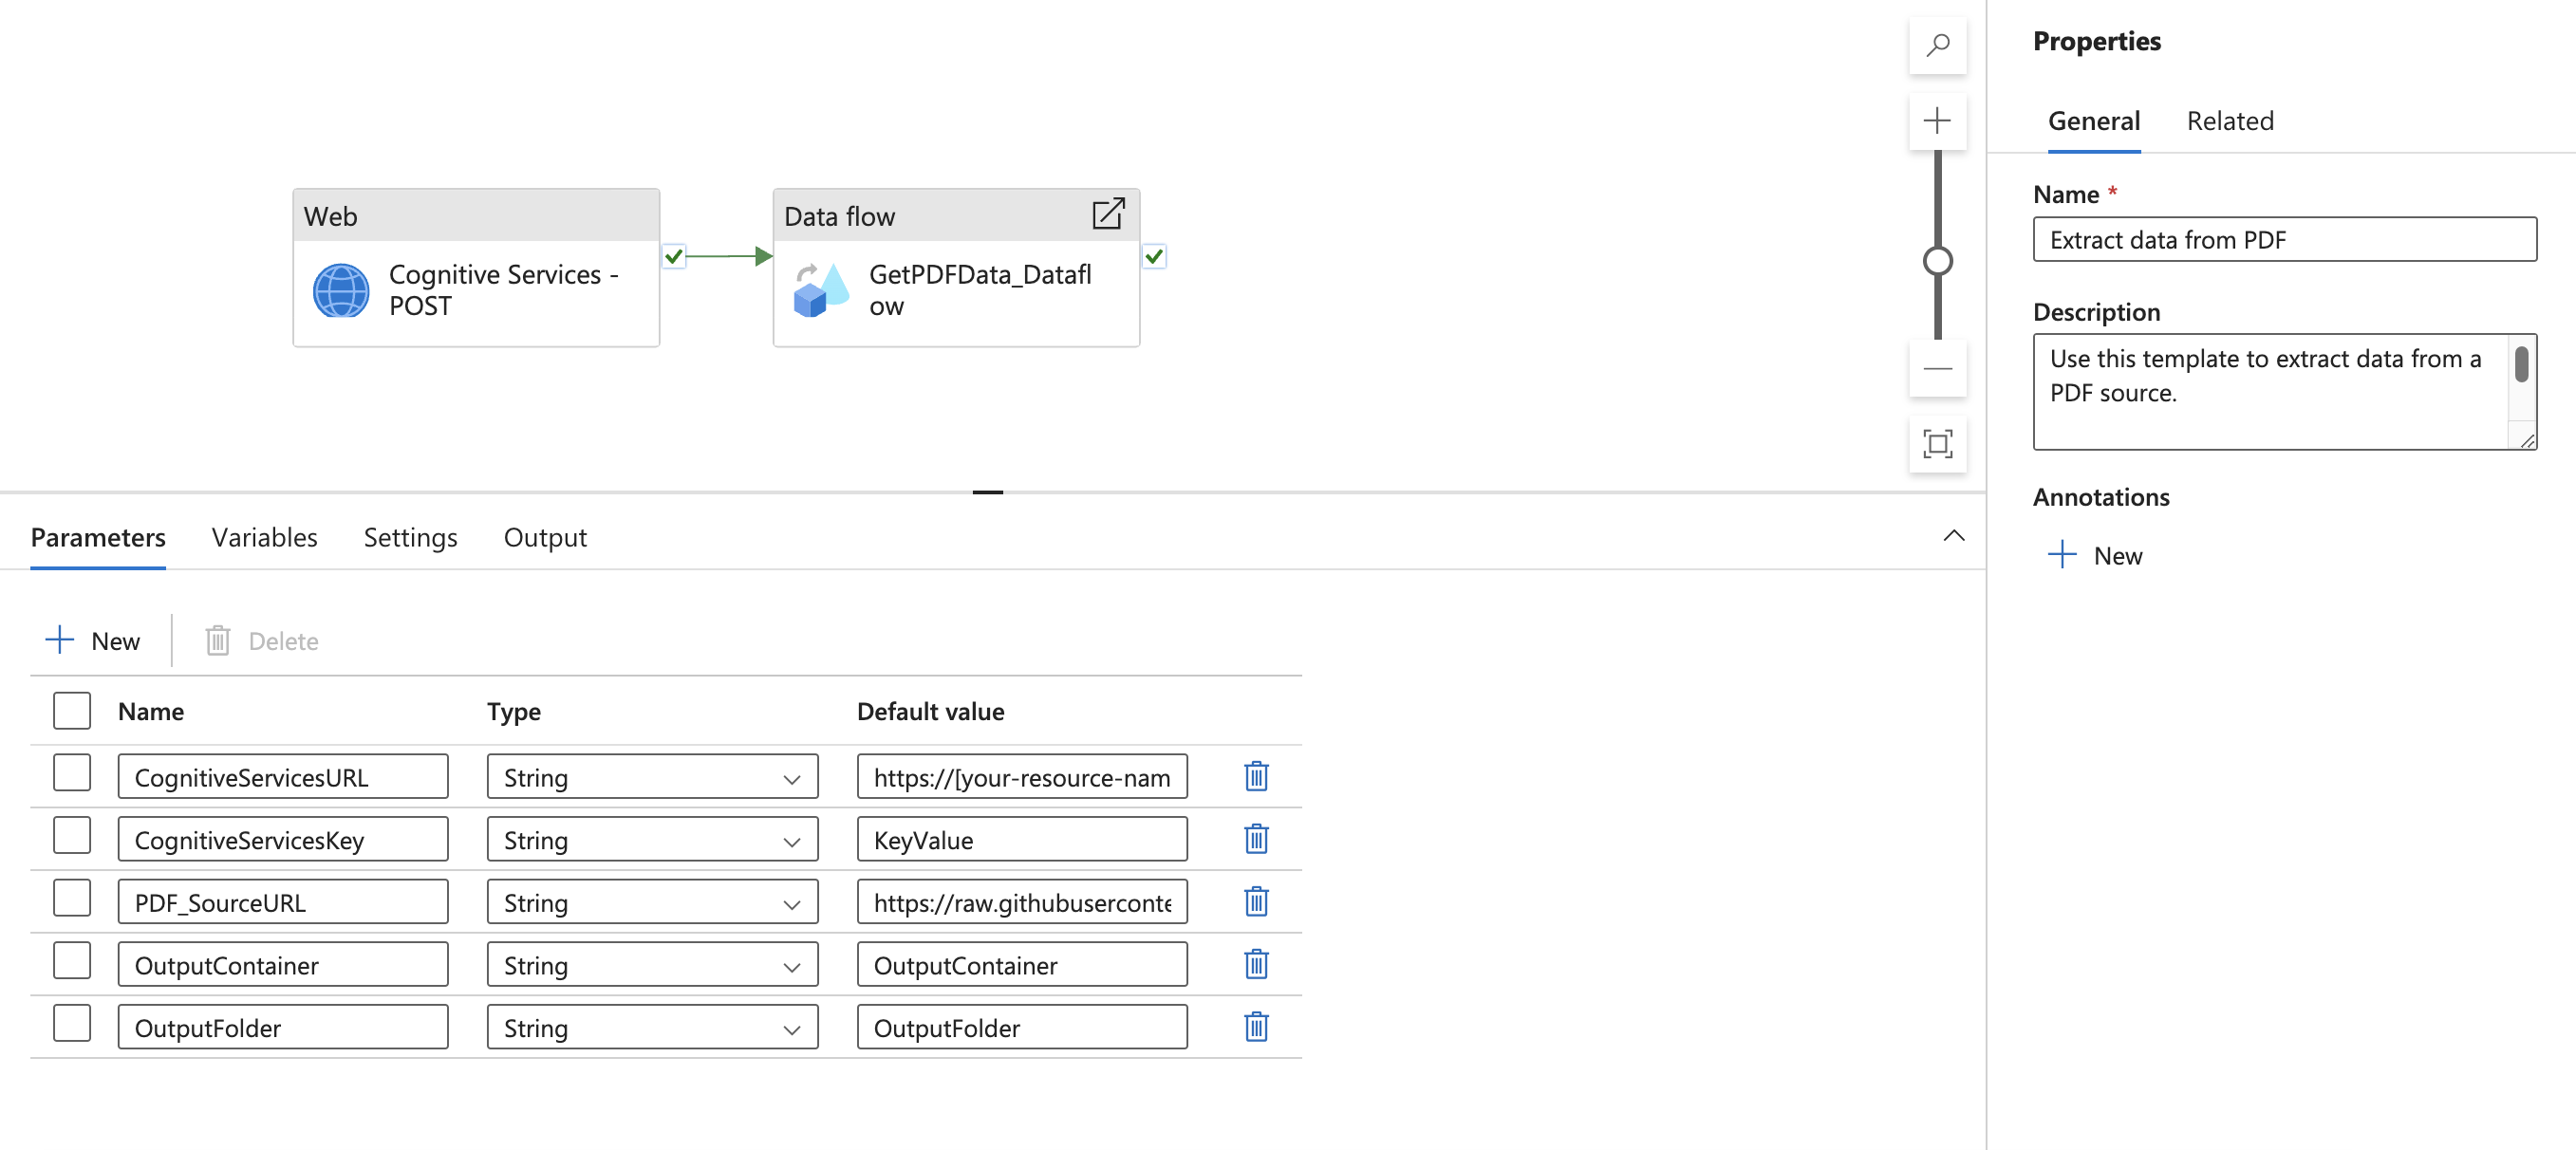 Screenshot of pipeline view with web activity linking to a dataflow activity.